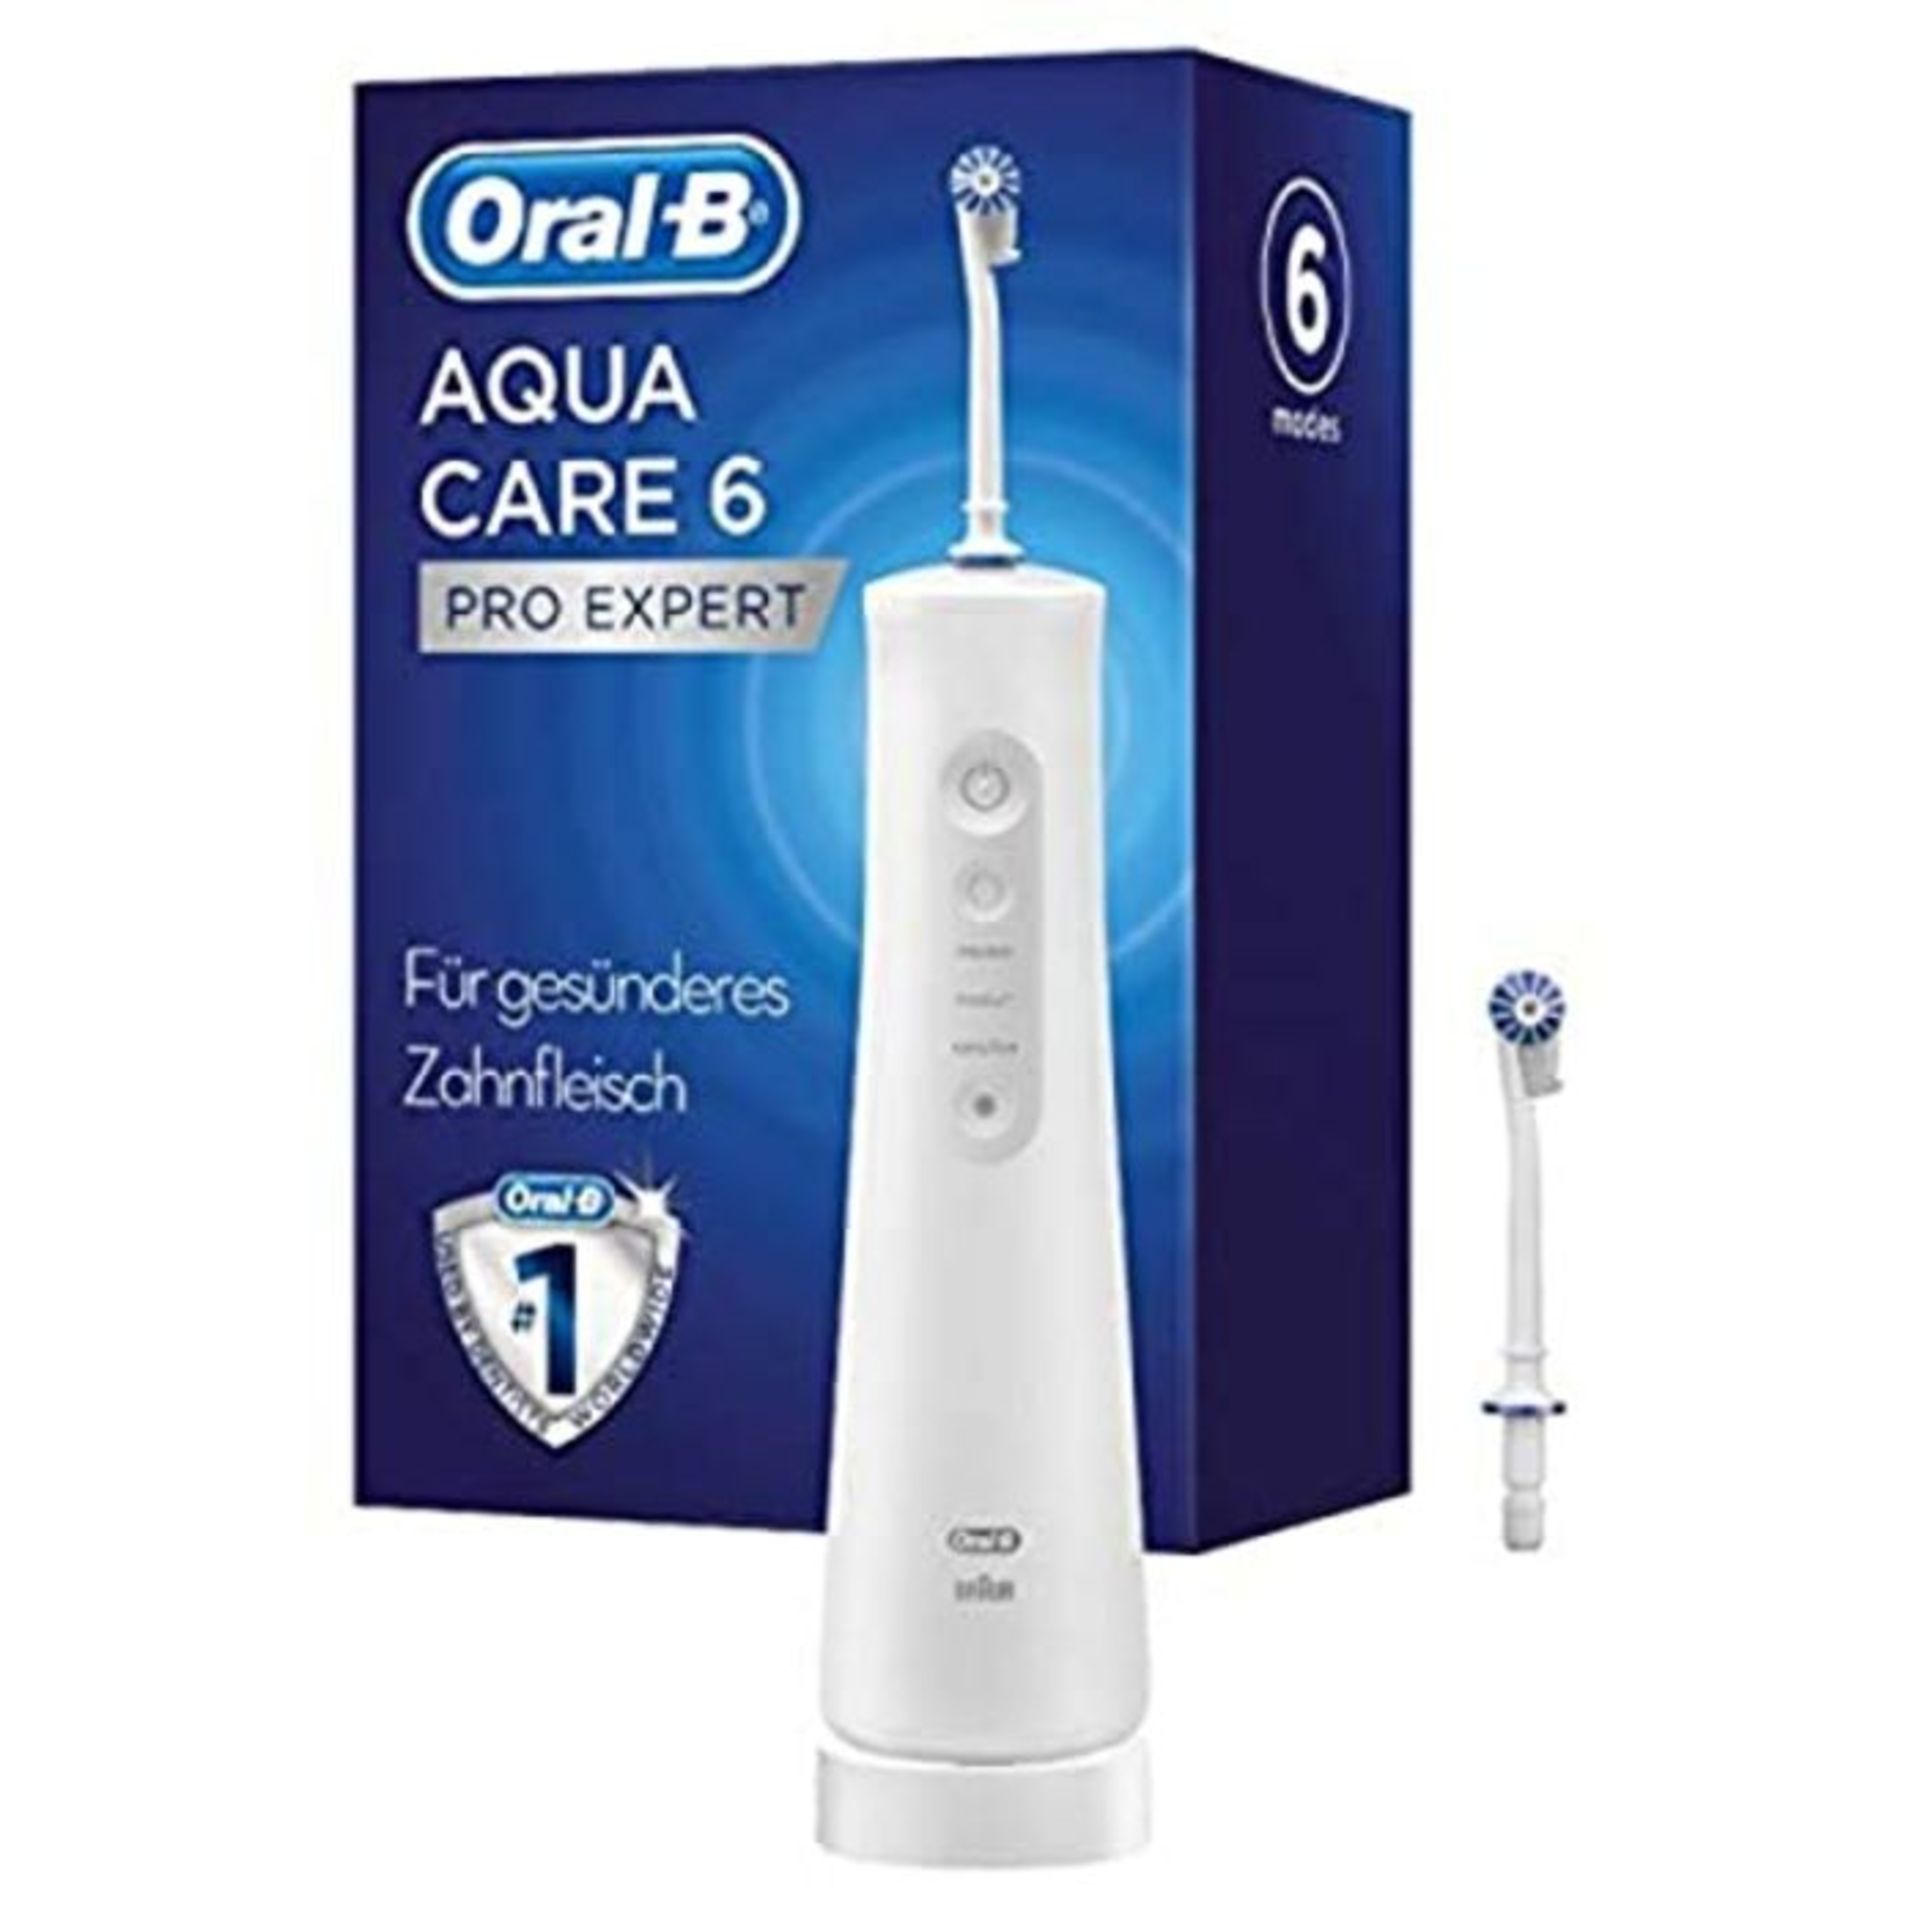 RRP £79.00 ORAL-B Aqua Care Pro-Expert Dental Water Jet Technology with Oxyjet